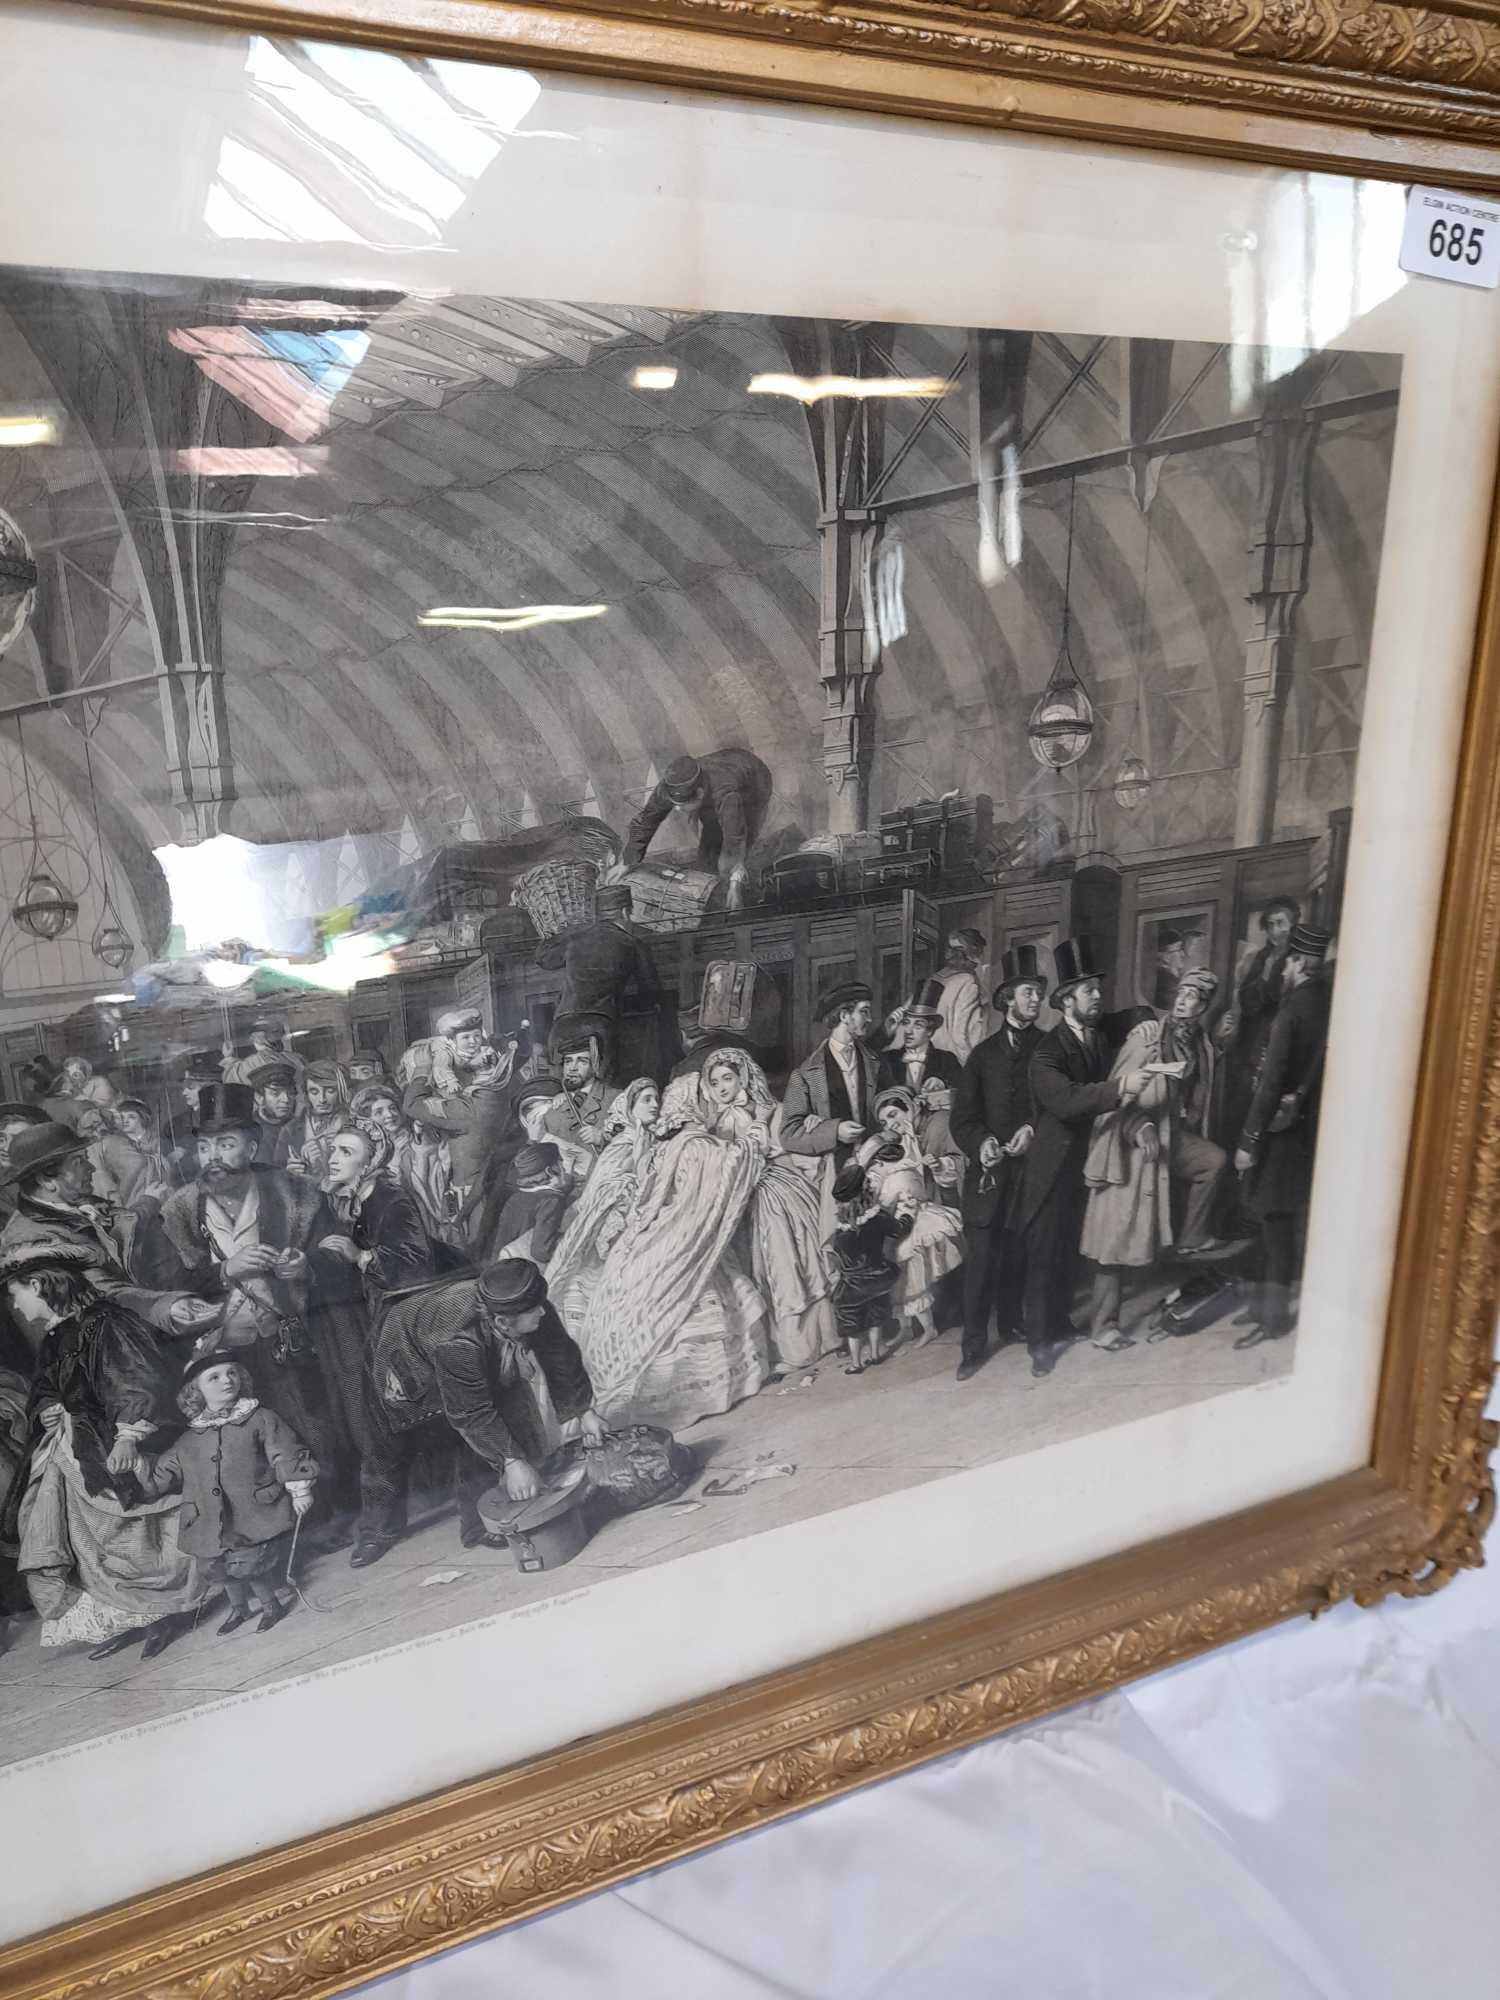 LARGE PRINT- THE RAILWAY STATION - Image 18 of 24